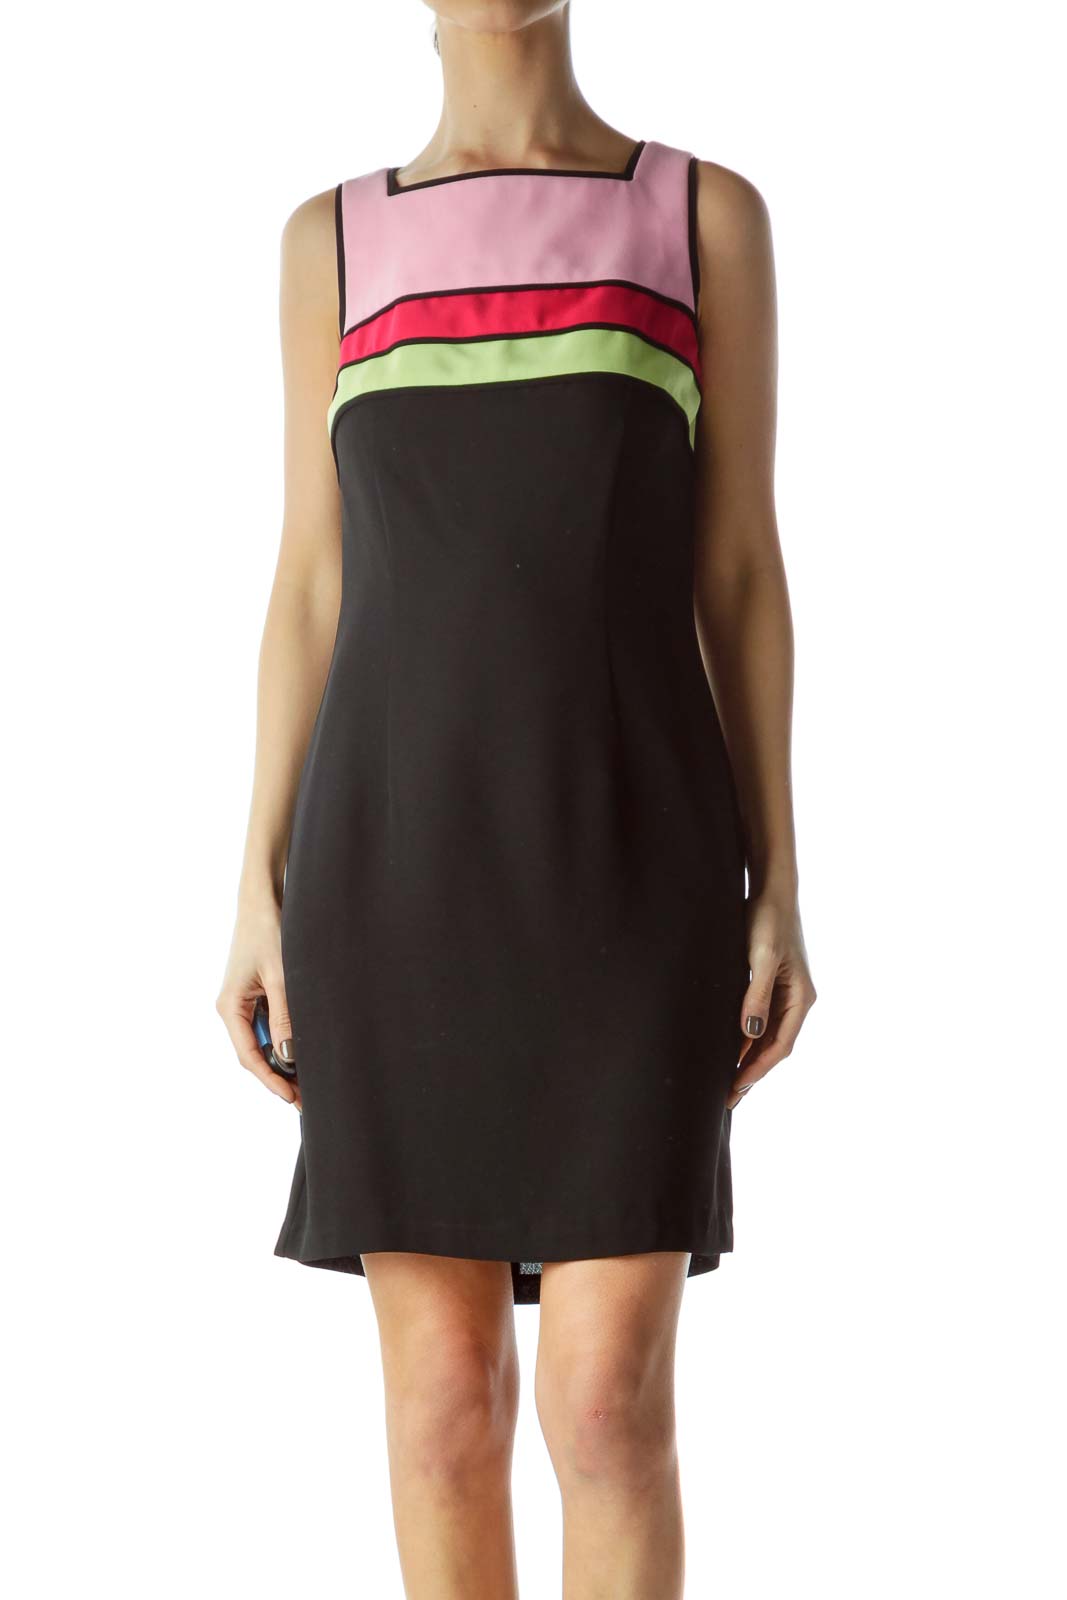 Black with Pop of Color Dress Front